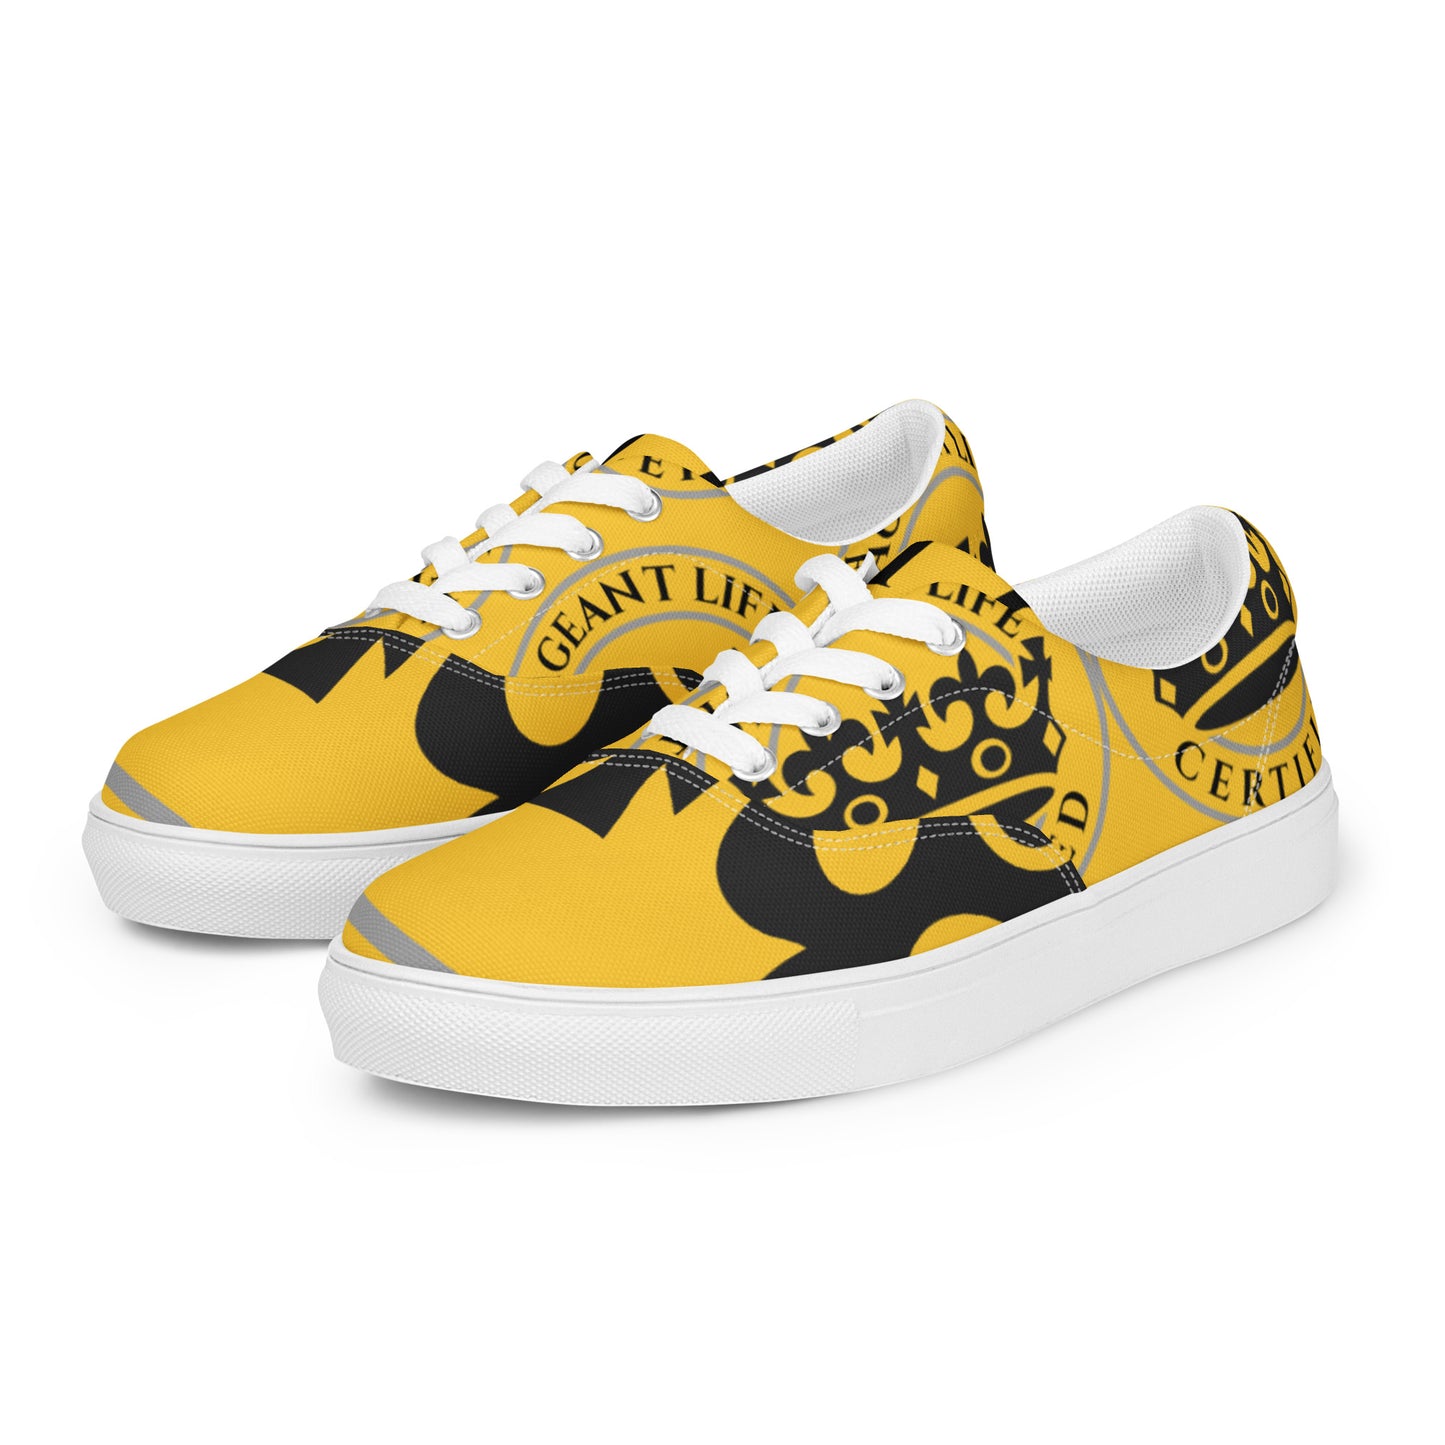 Black and Yellow Pageant Life Certified Women’s lace-up canvas shoes